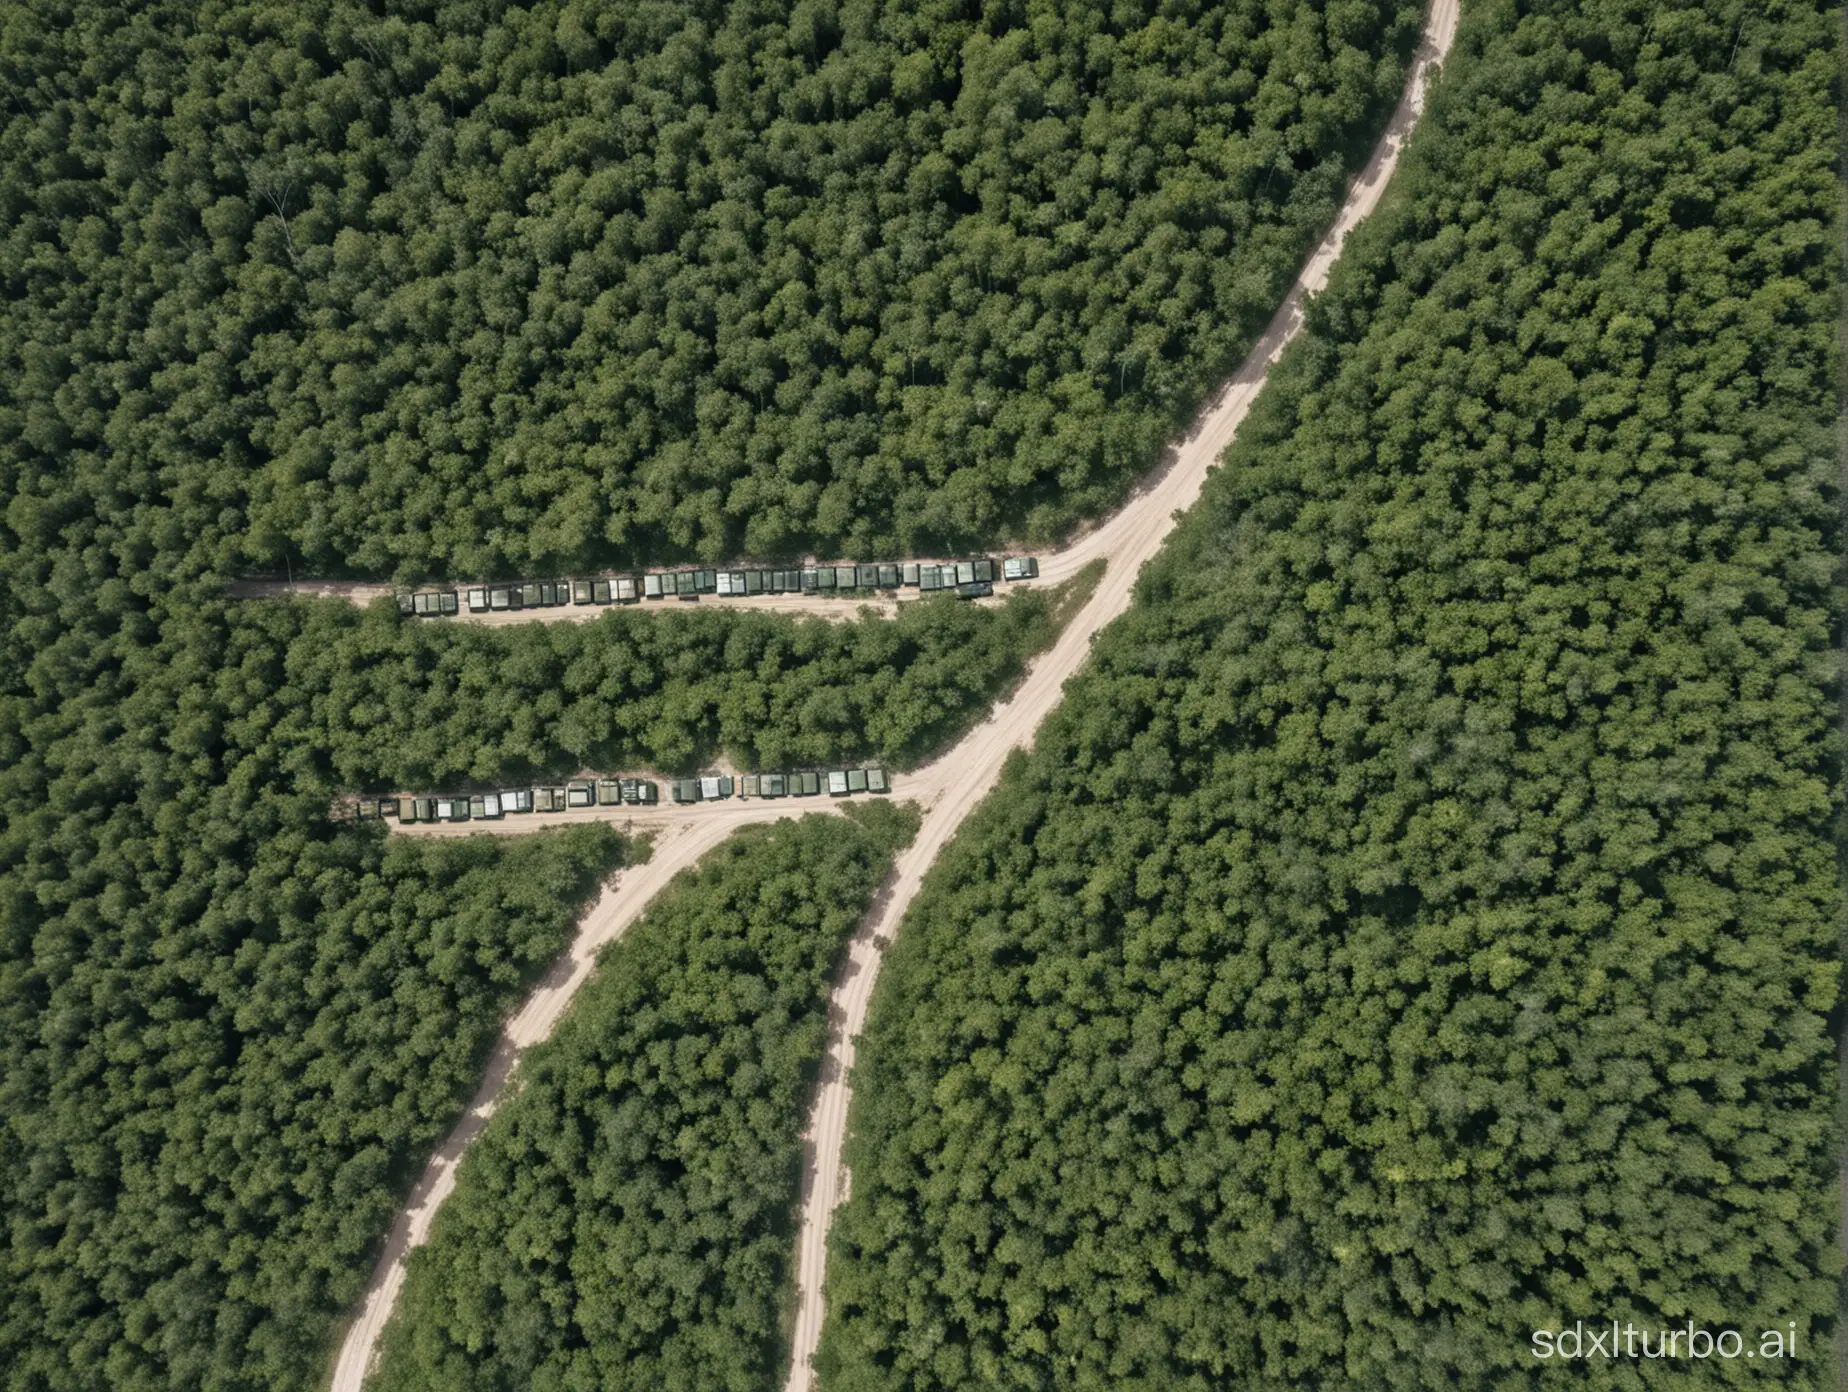 Satellite view of convoy  tanks passing through a jungle area.